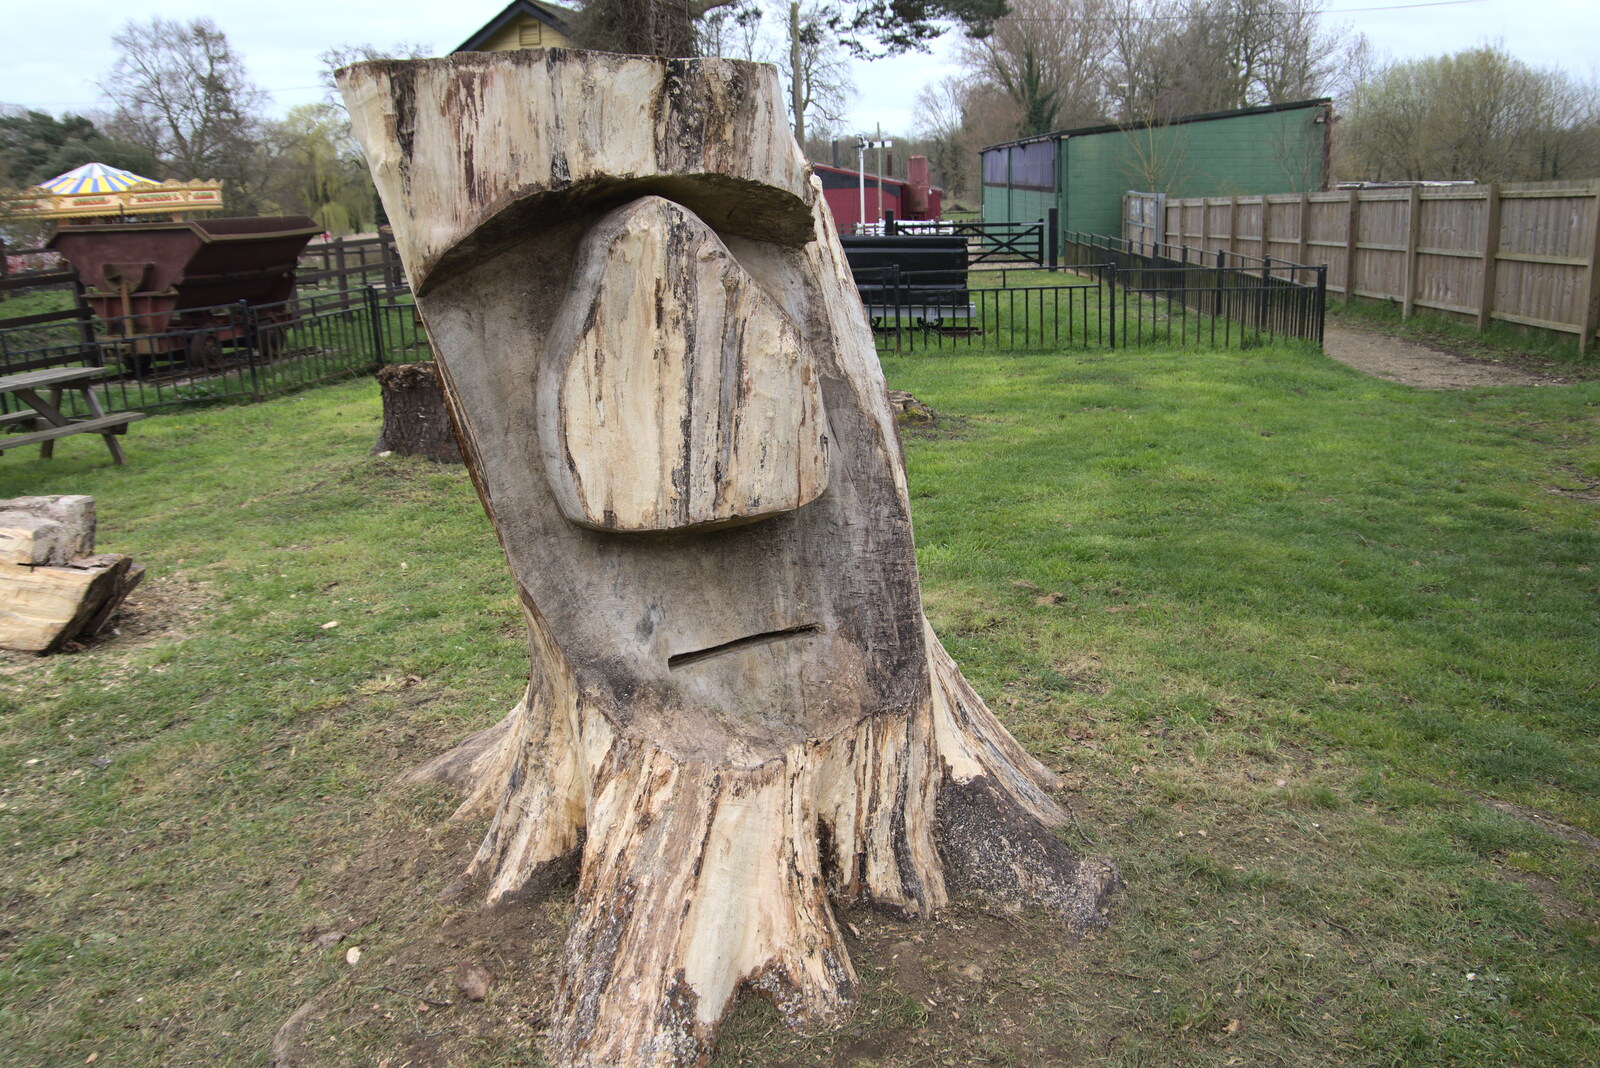 A carved face in a tree stump from A Return to Bressingham Steam and Gardens, Bressingham, Norfolk - 28th March 2021